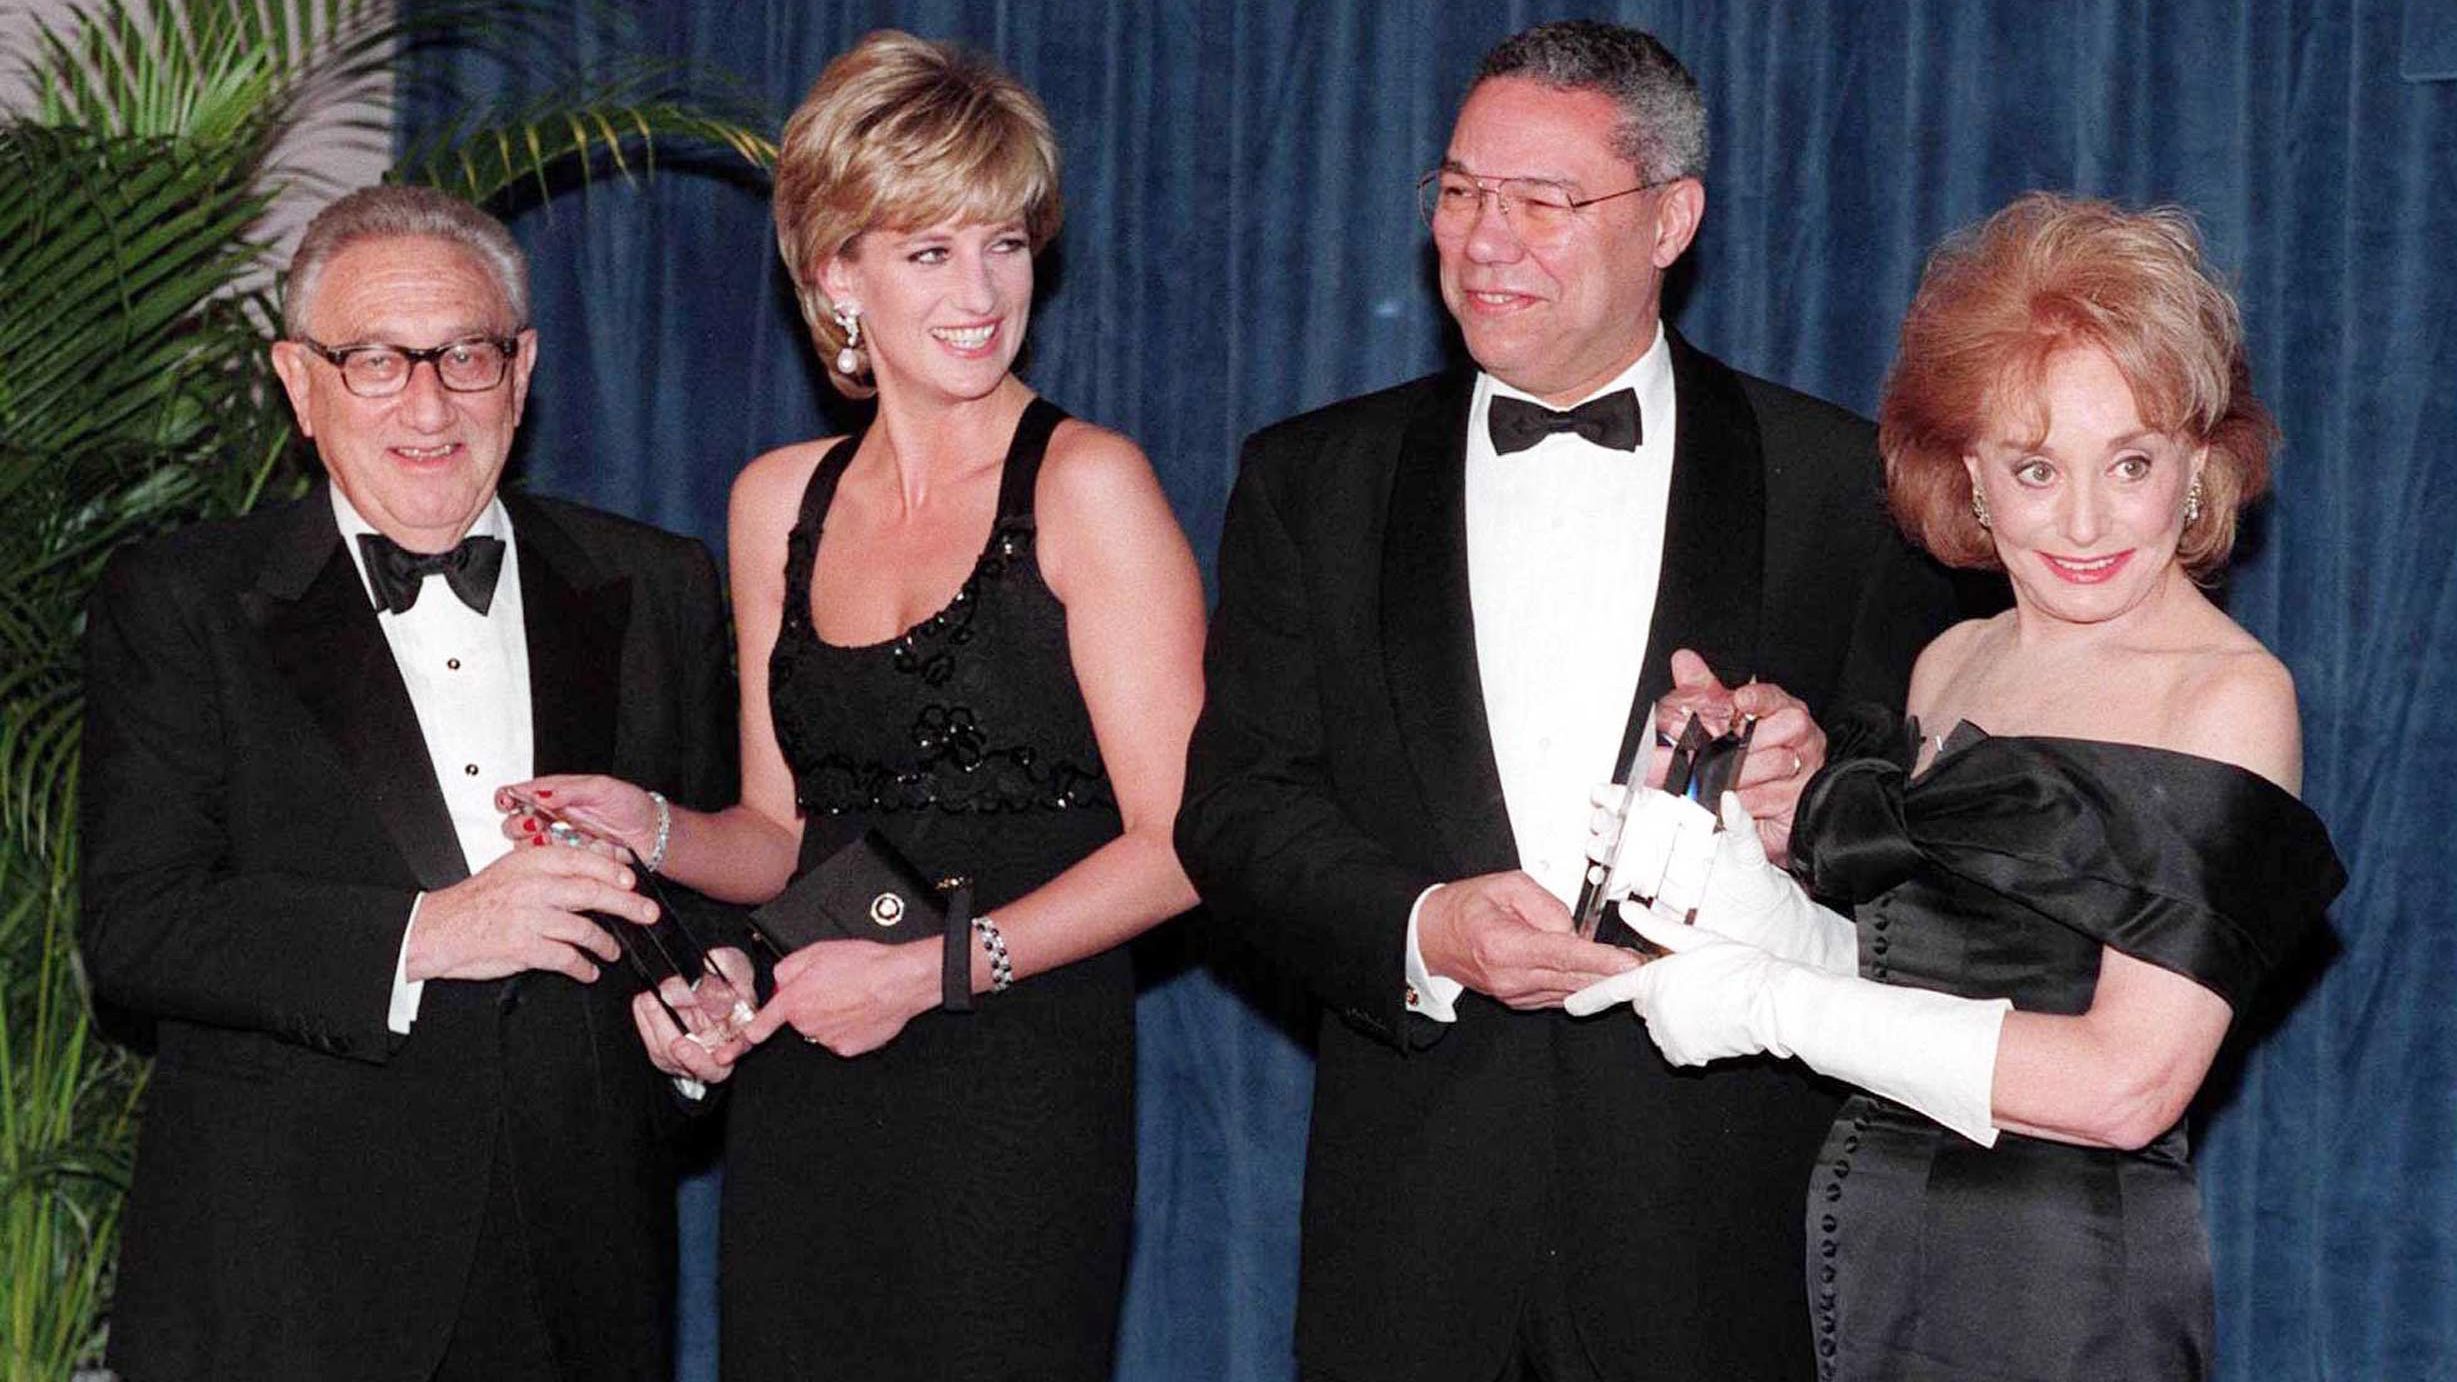 From left, Kissinger, Princess Diana, Colin Powell and Barbara Walters attend the United Cerebral Palsy annual dinner in New York in 1995. Diana received a humanitarian award.